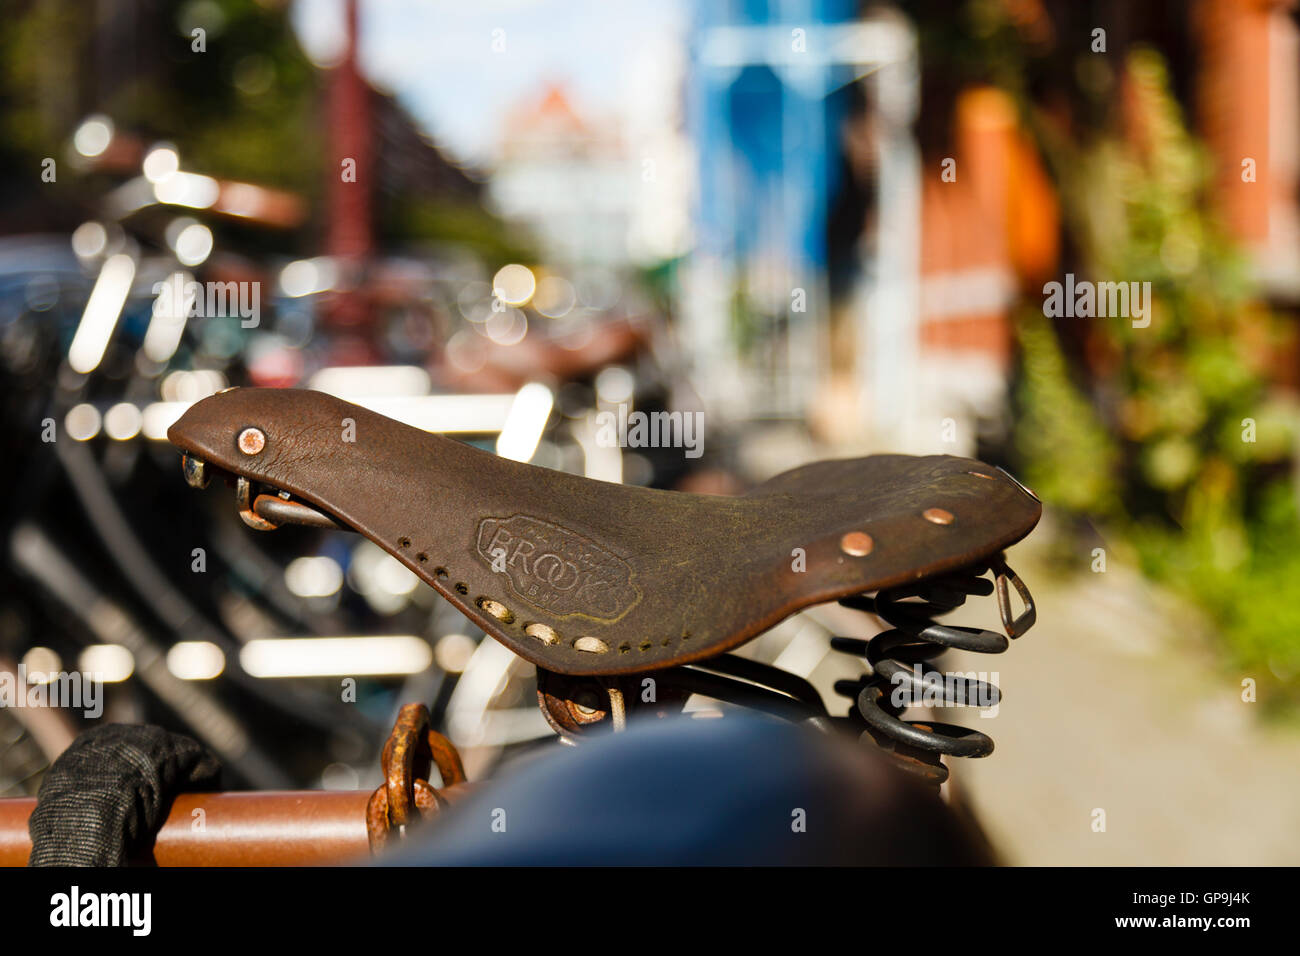 A Brooks saddle on a bike in Amsterdam Holland Netherlands Stock Photo